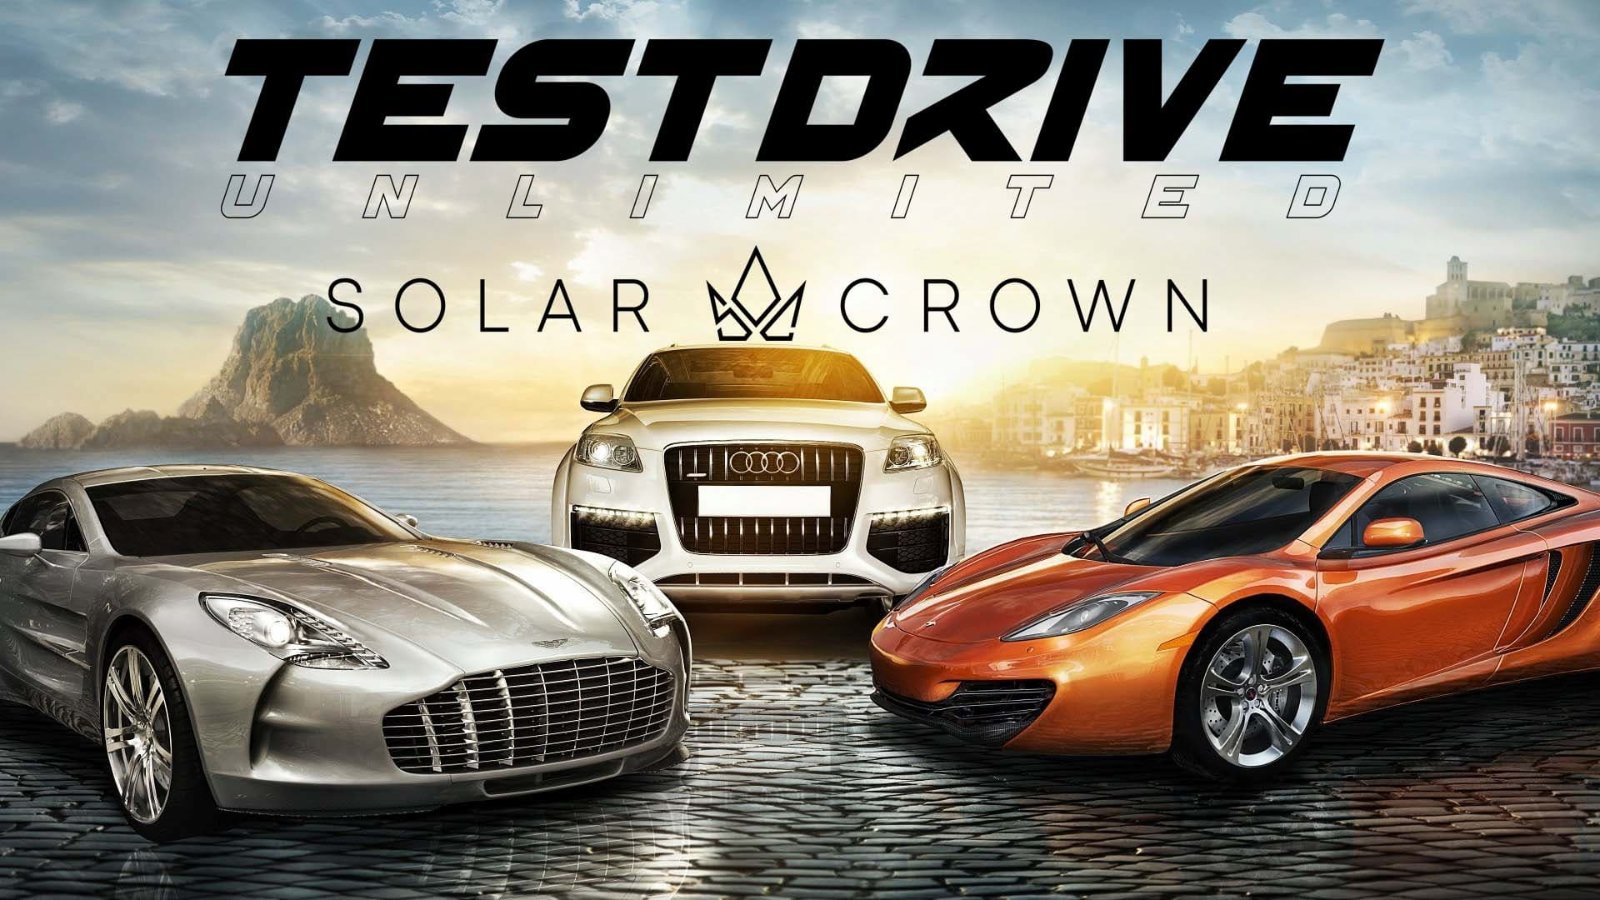 More information about "Nuovo trailer di anteprima per Test Drive Unlimited Solar Crown"